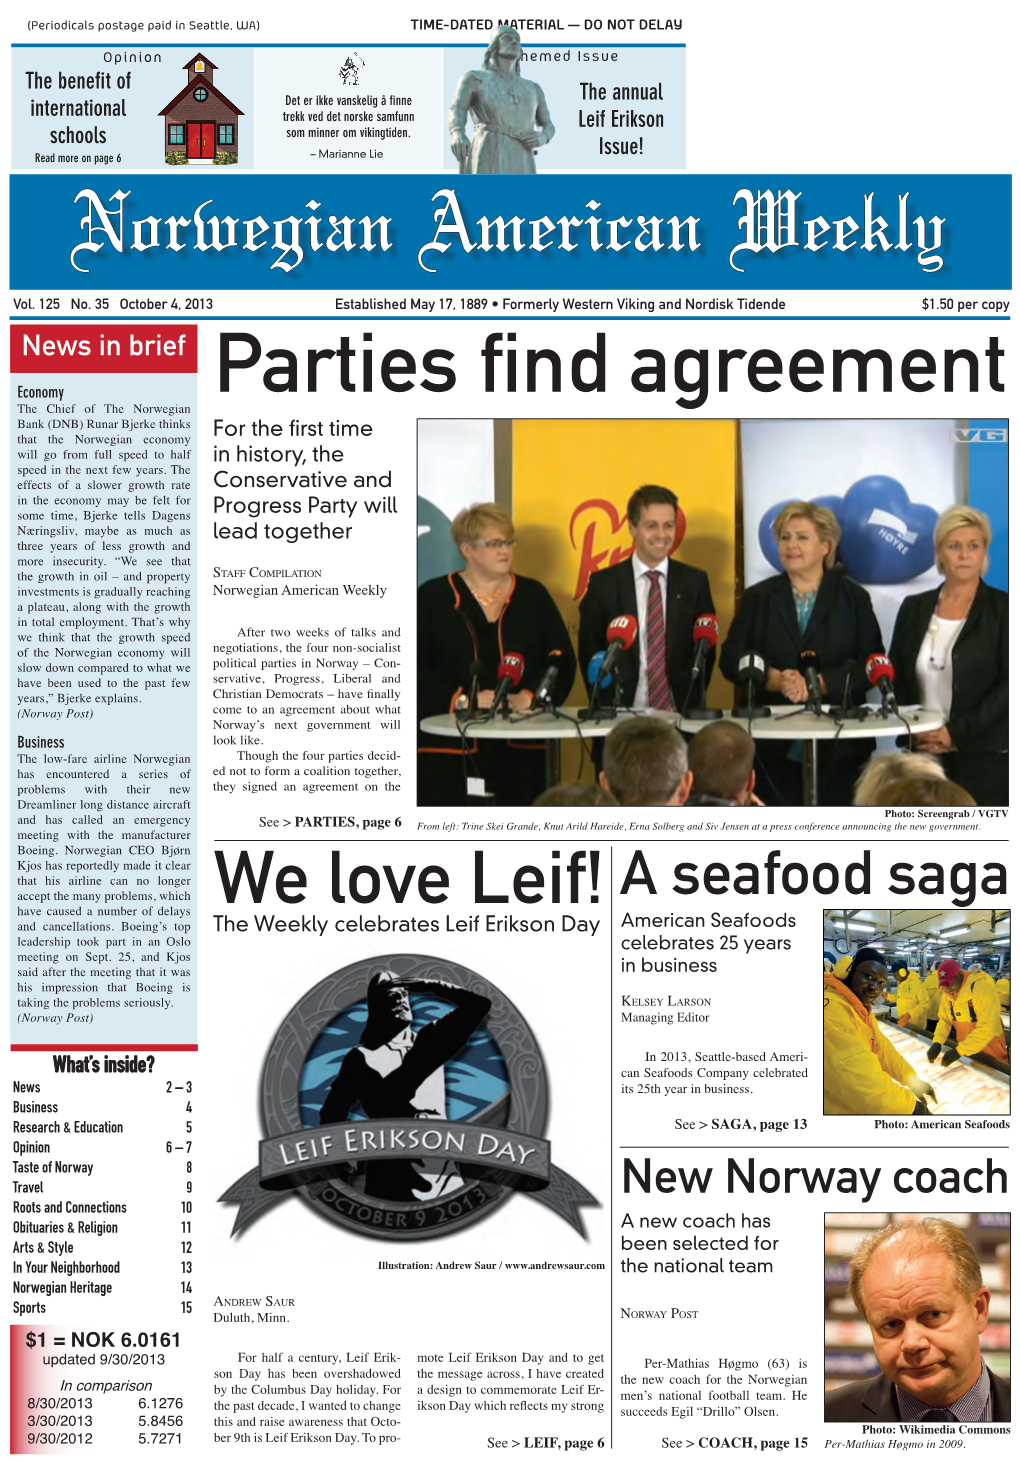 Parties Find Agreement